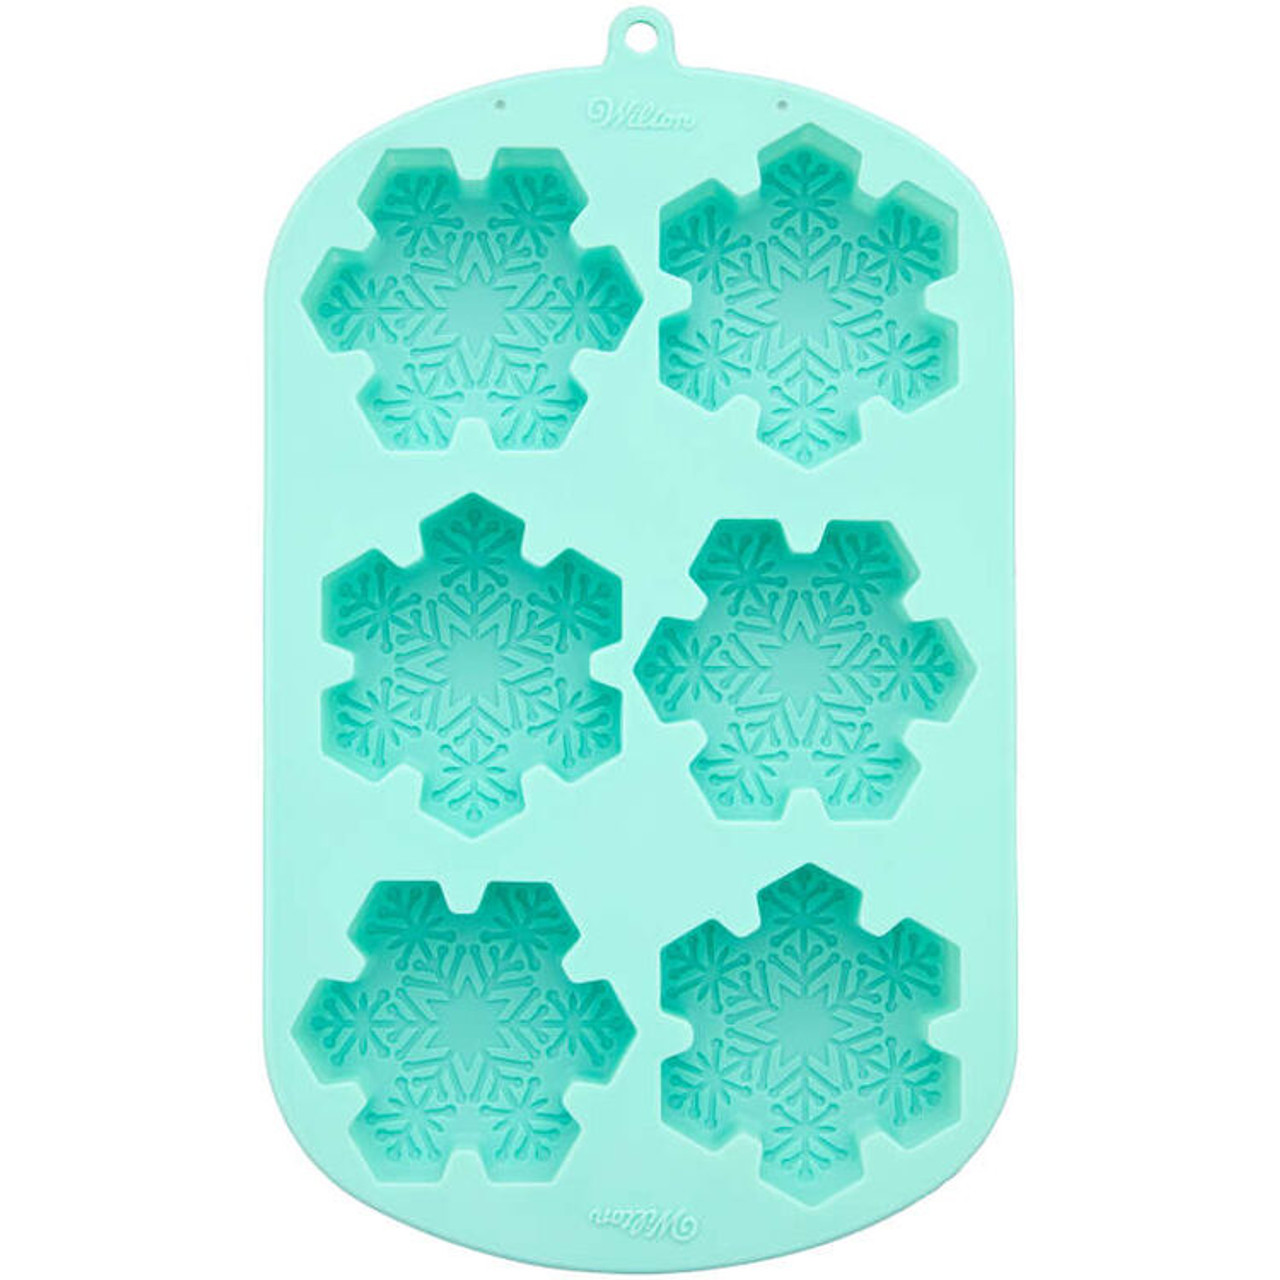 https://cdn11.bigcommerce.com/s-w8h1g5/images/stencil/1280x1280/products/12566/33706/2105-0-0743-Wilton-Winter-Snowflake-Silicone-Baking-and-Candy-Mold-6-Cavity-M__05154.1637038098.jpg?c=2